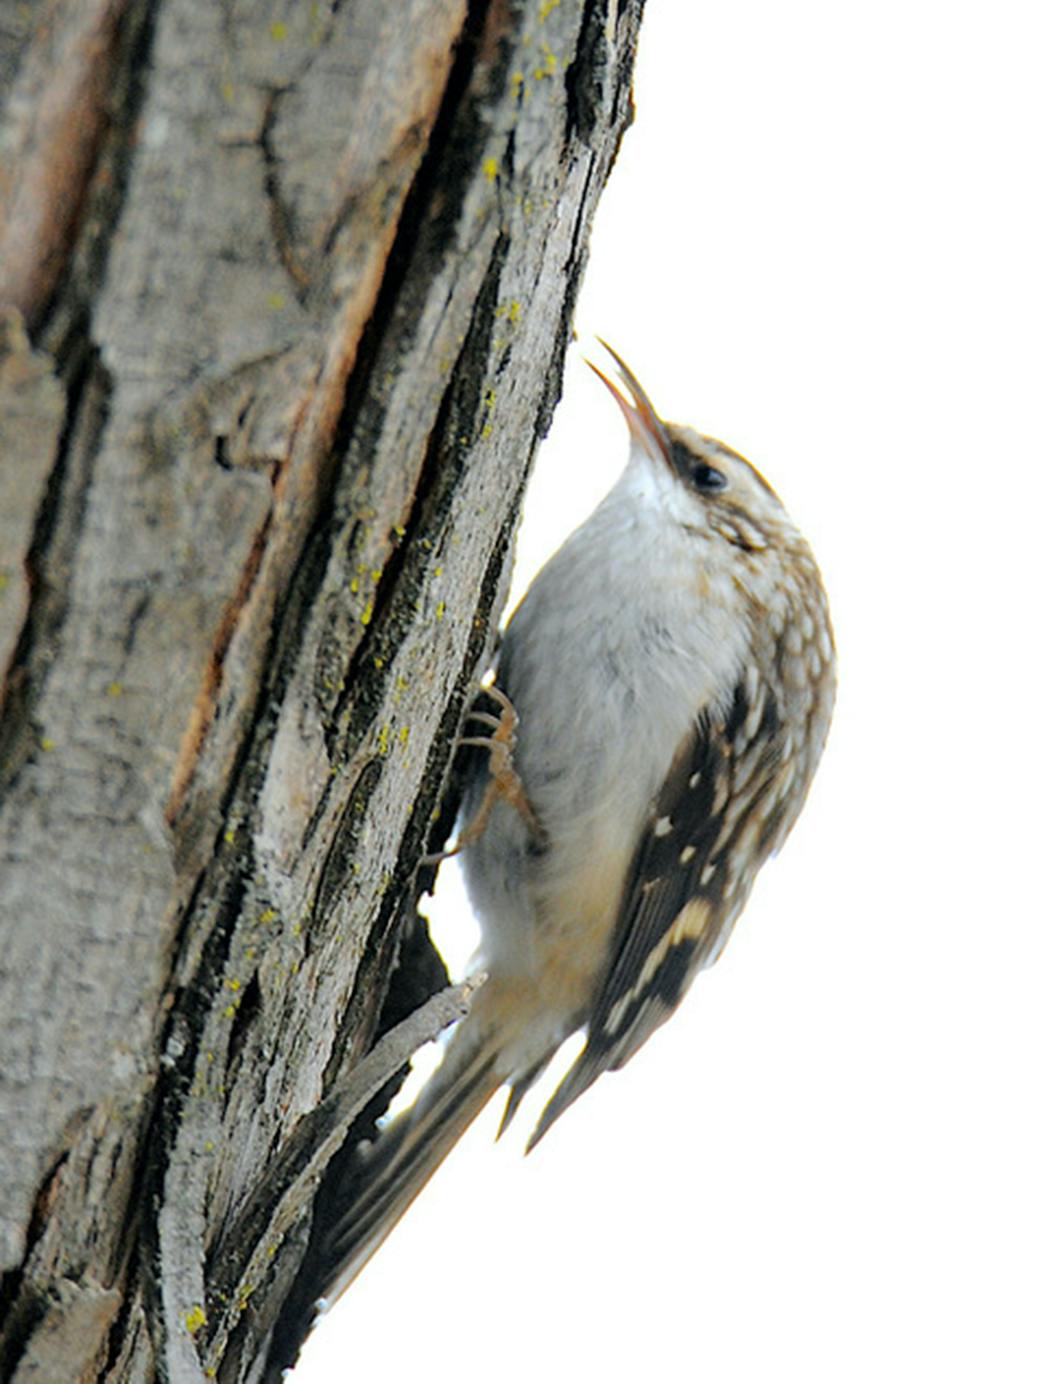 Look closely — The sharp tweezer bill of the brown creeper is about to capture a tiny insect on the bark. The bird takes spiders and insects and their eggs.